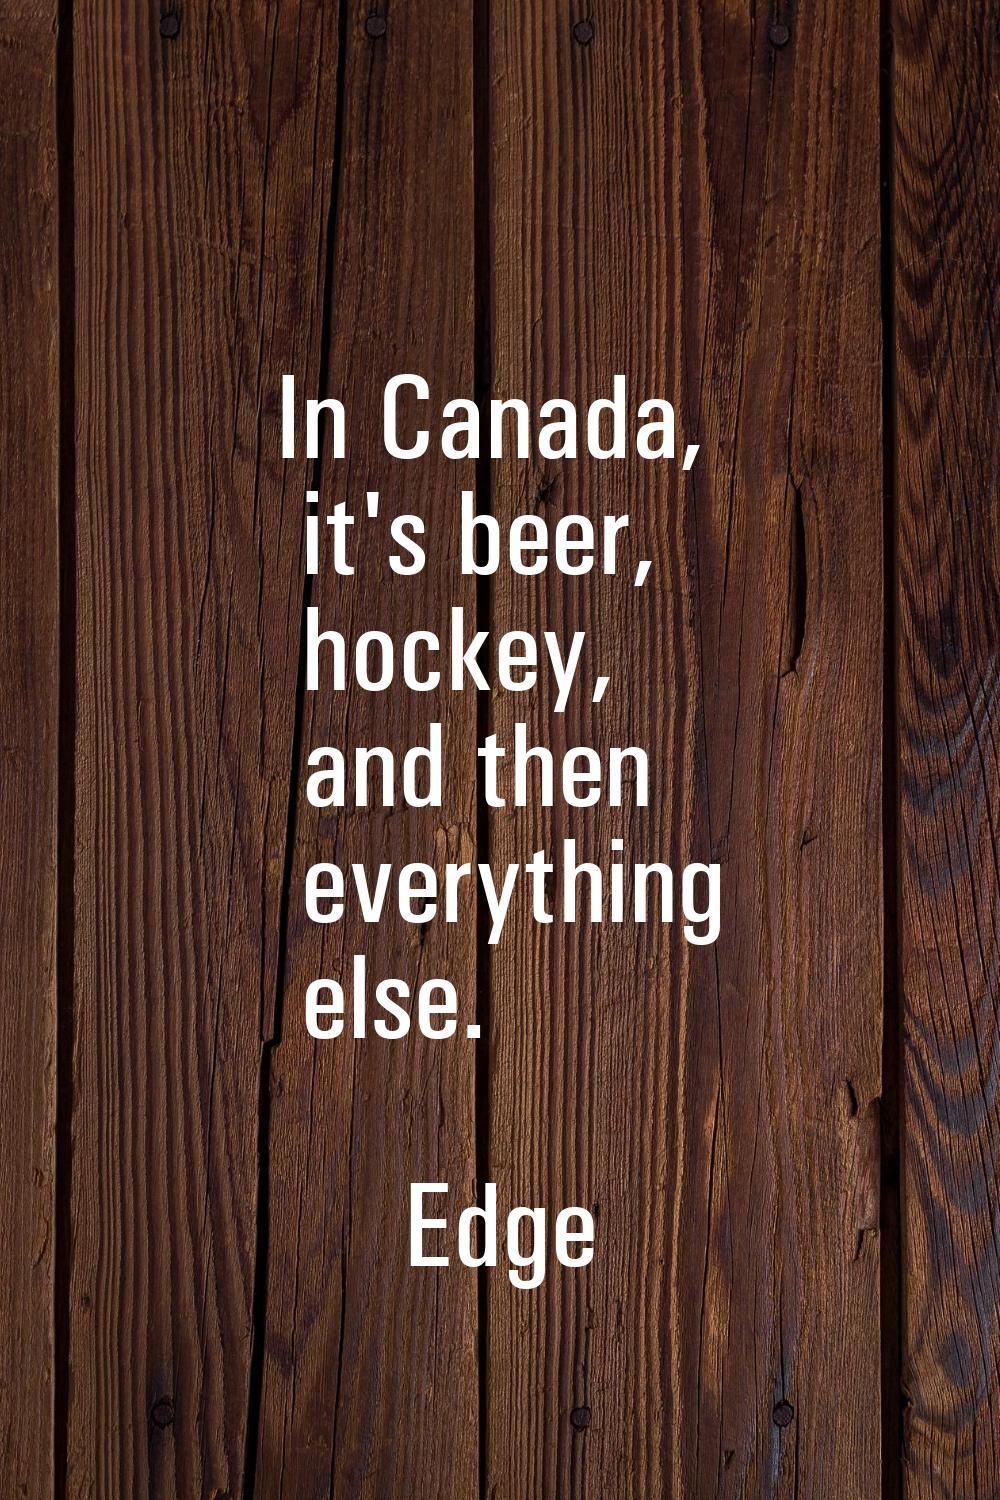 In Canada, it's beer, hockey, and then everything else.